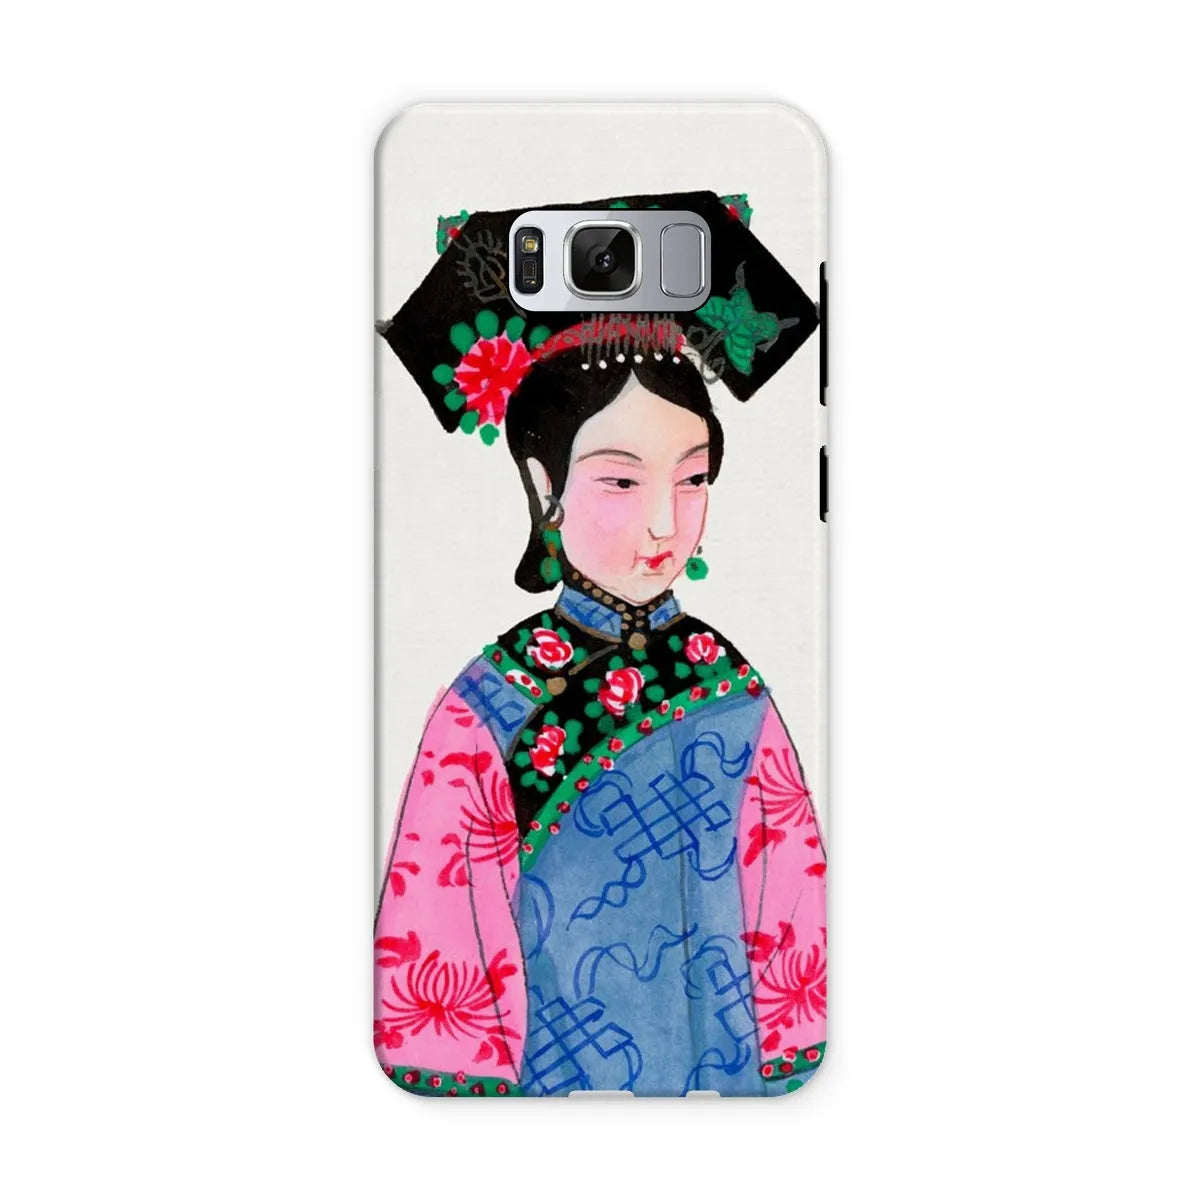 Noblewoman Too - Manchu Aesthetic Art Phone Case - Samsung Galaxy S8 / Matte - Mobile Phone Cases - Aesthetic Art